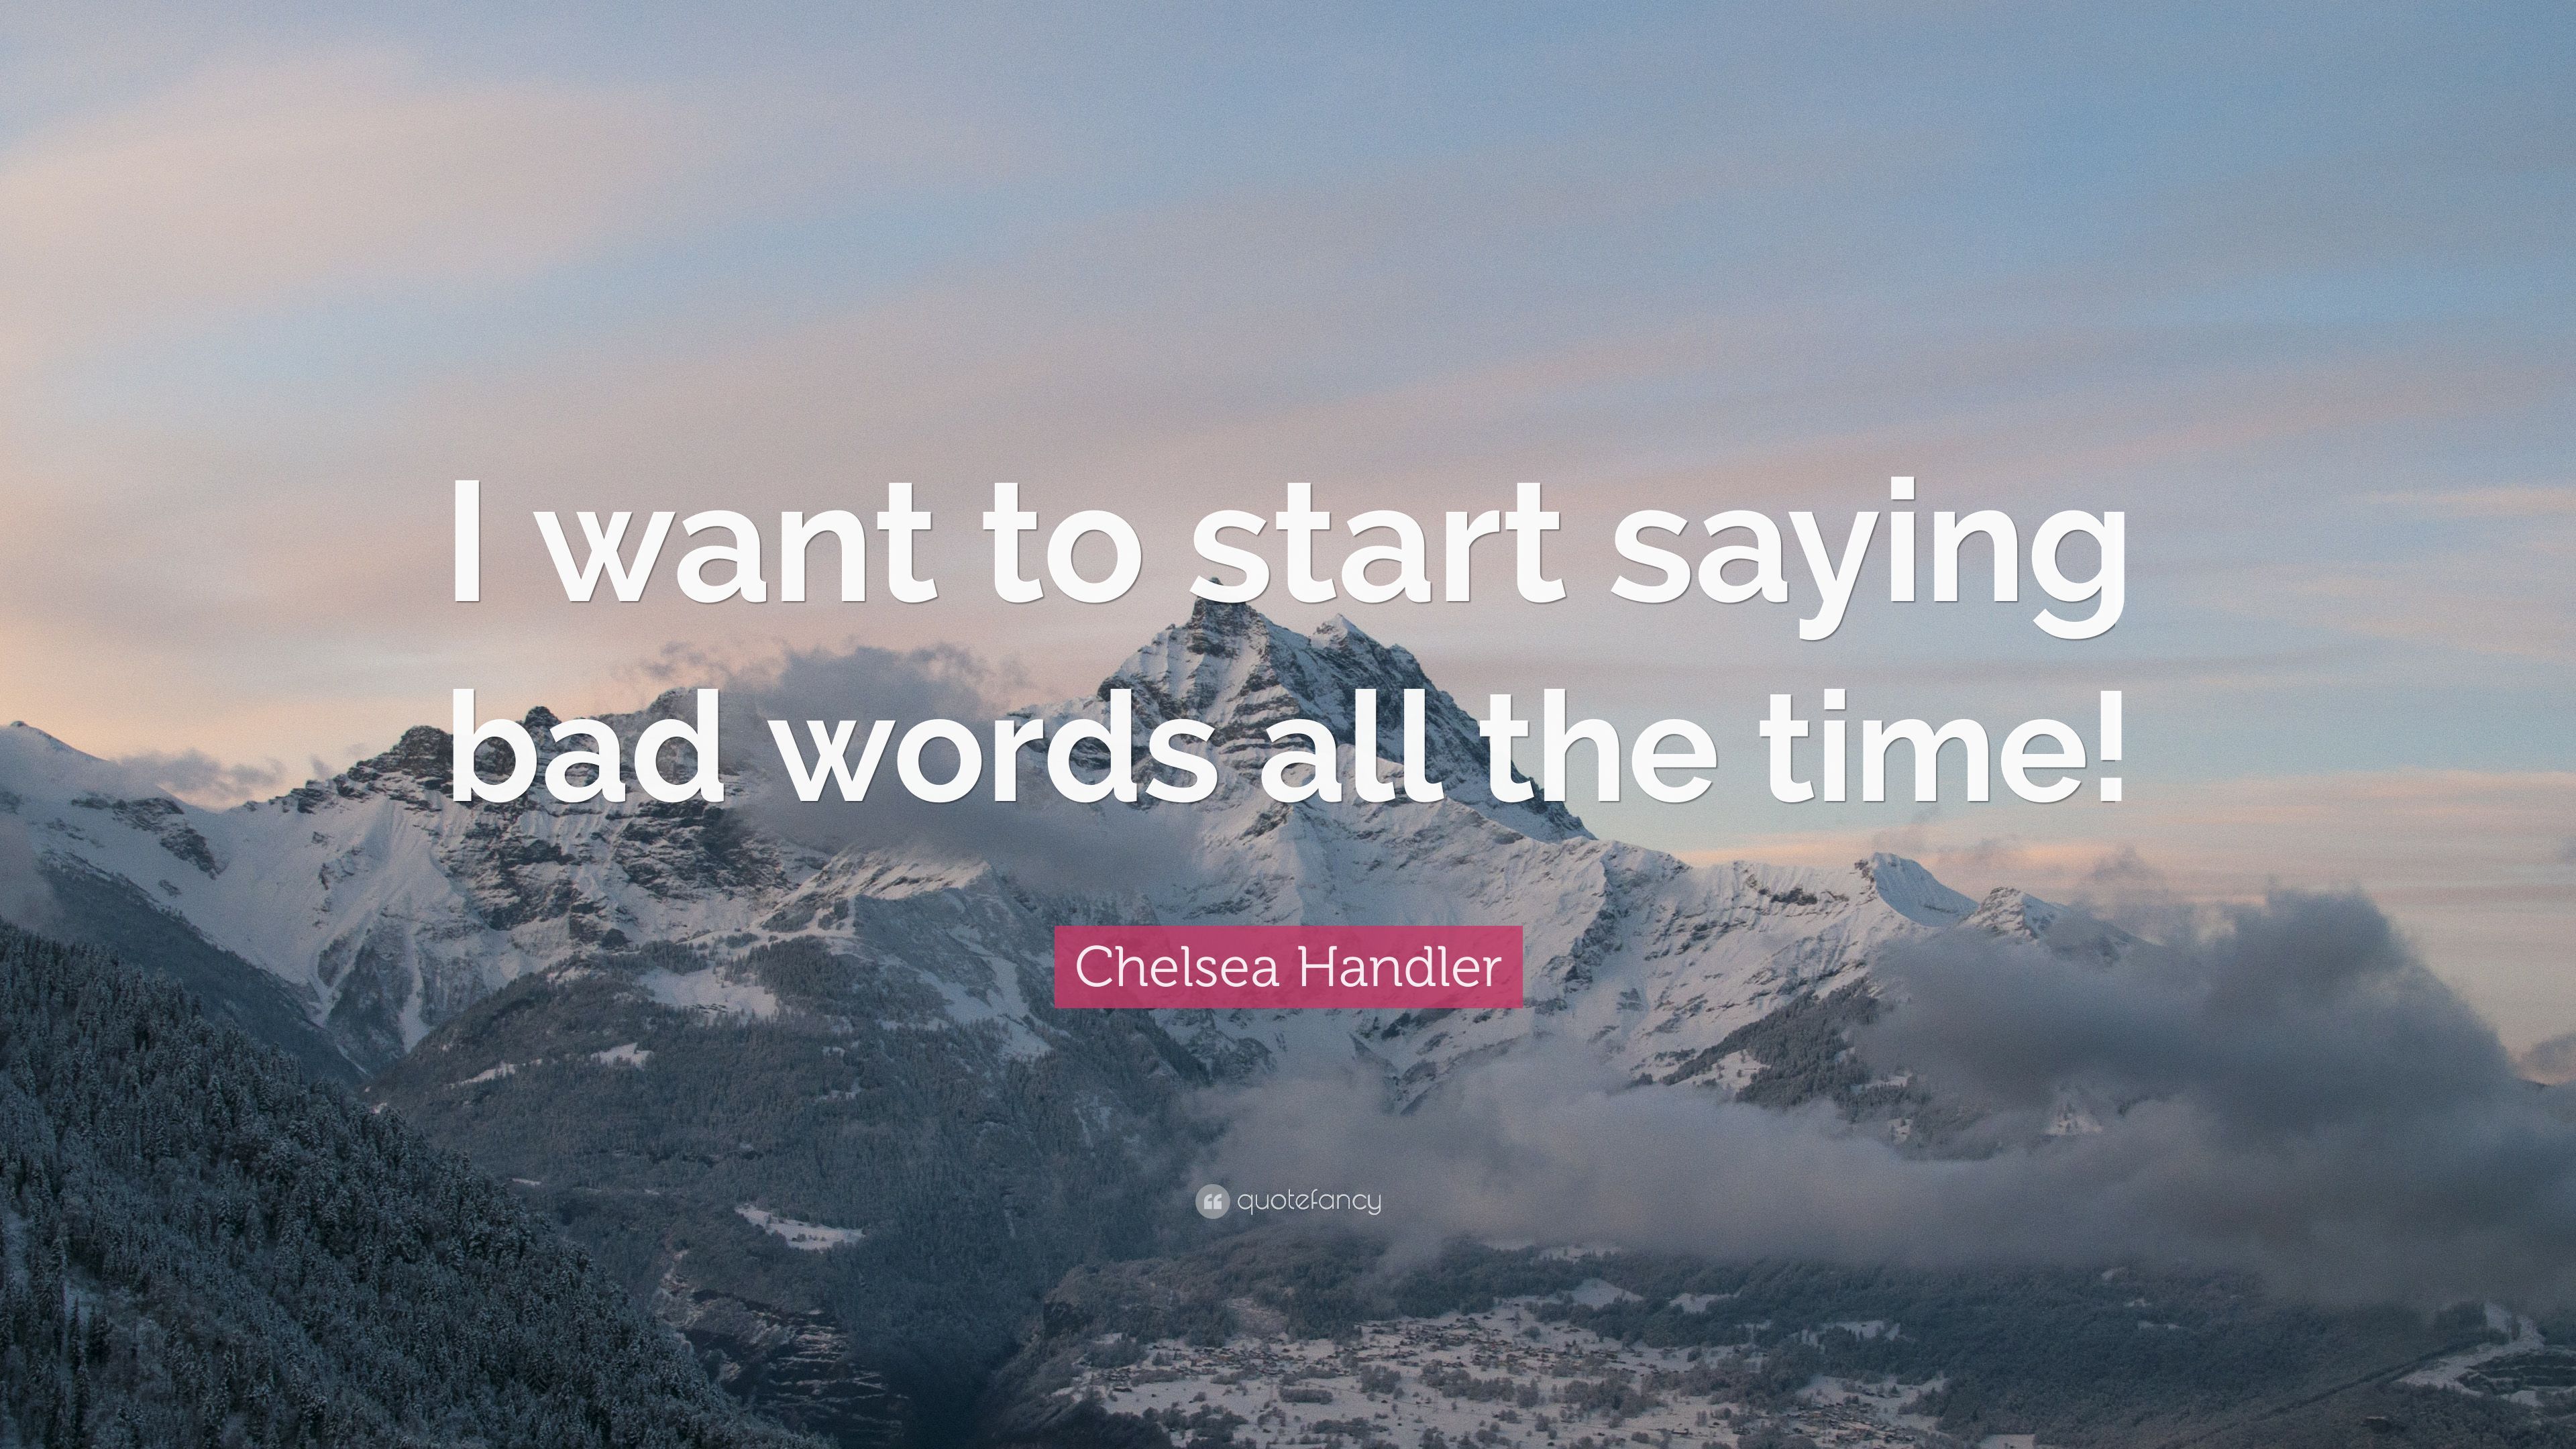 Chelsea Handler Quote: “I want to start saying bad words